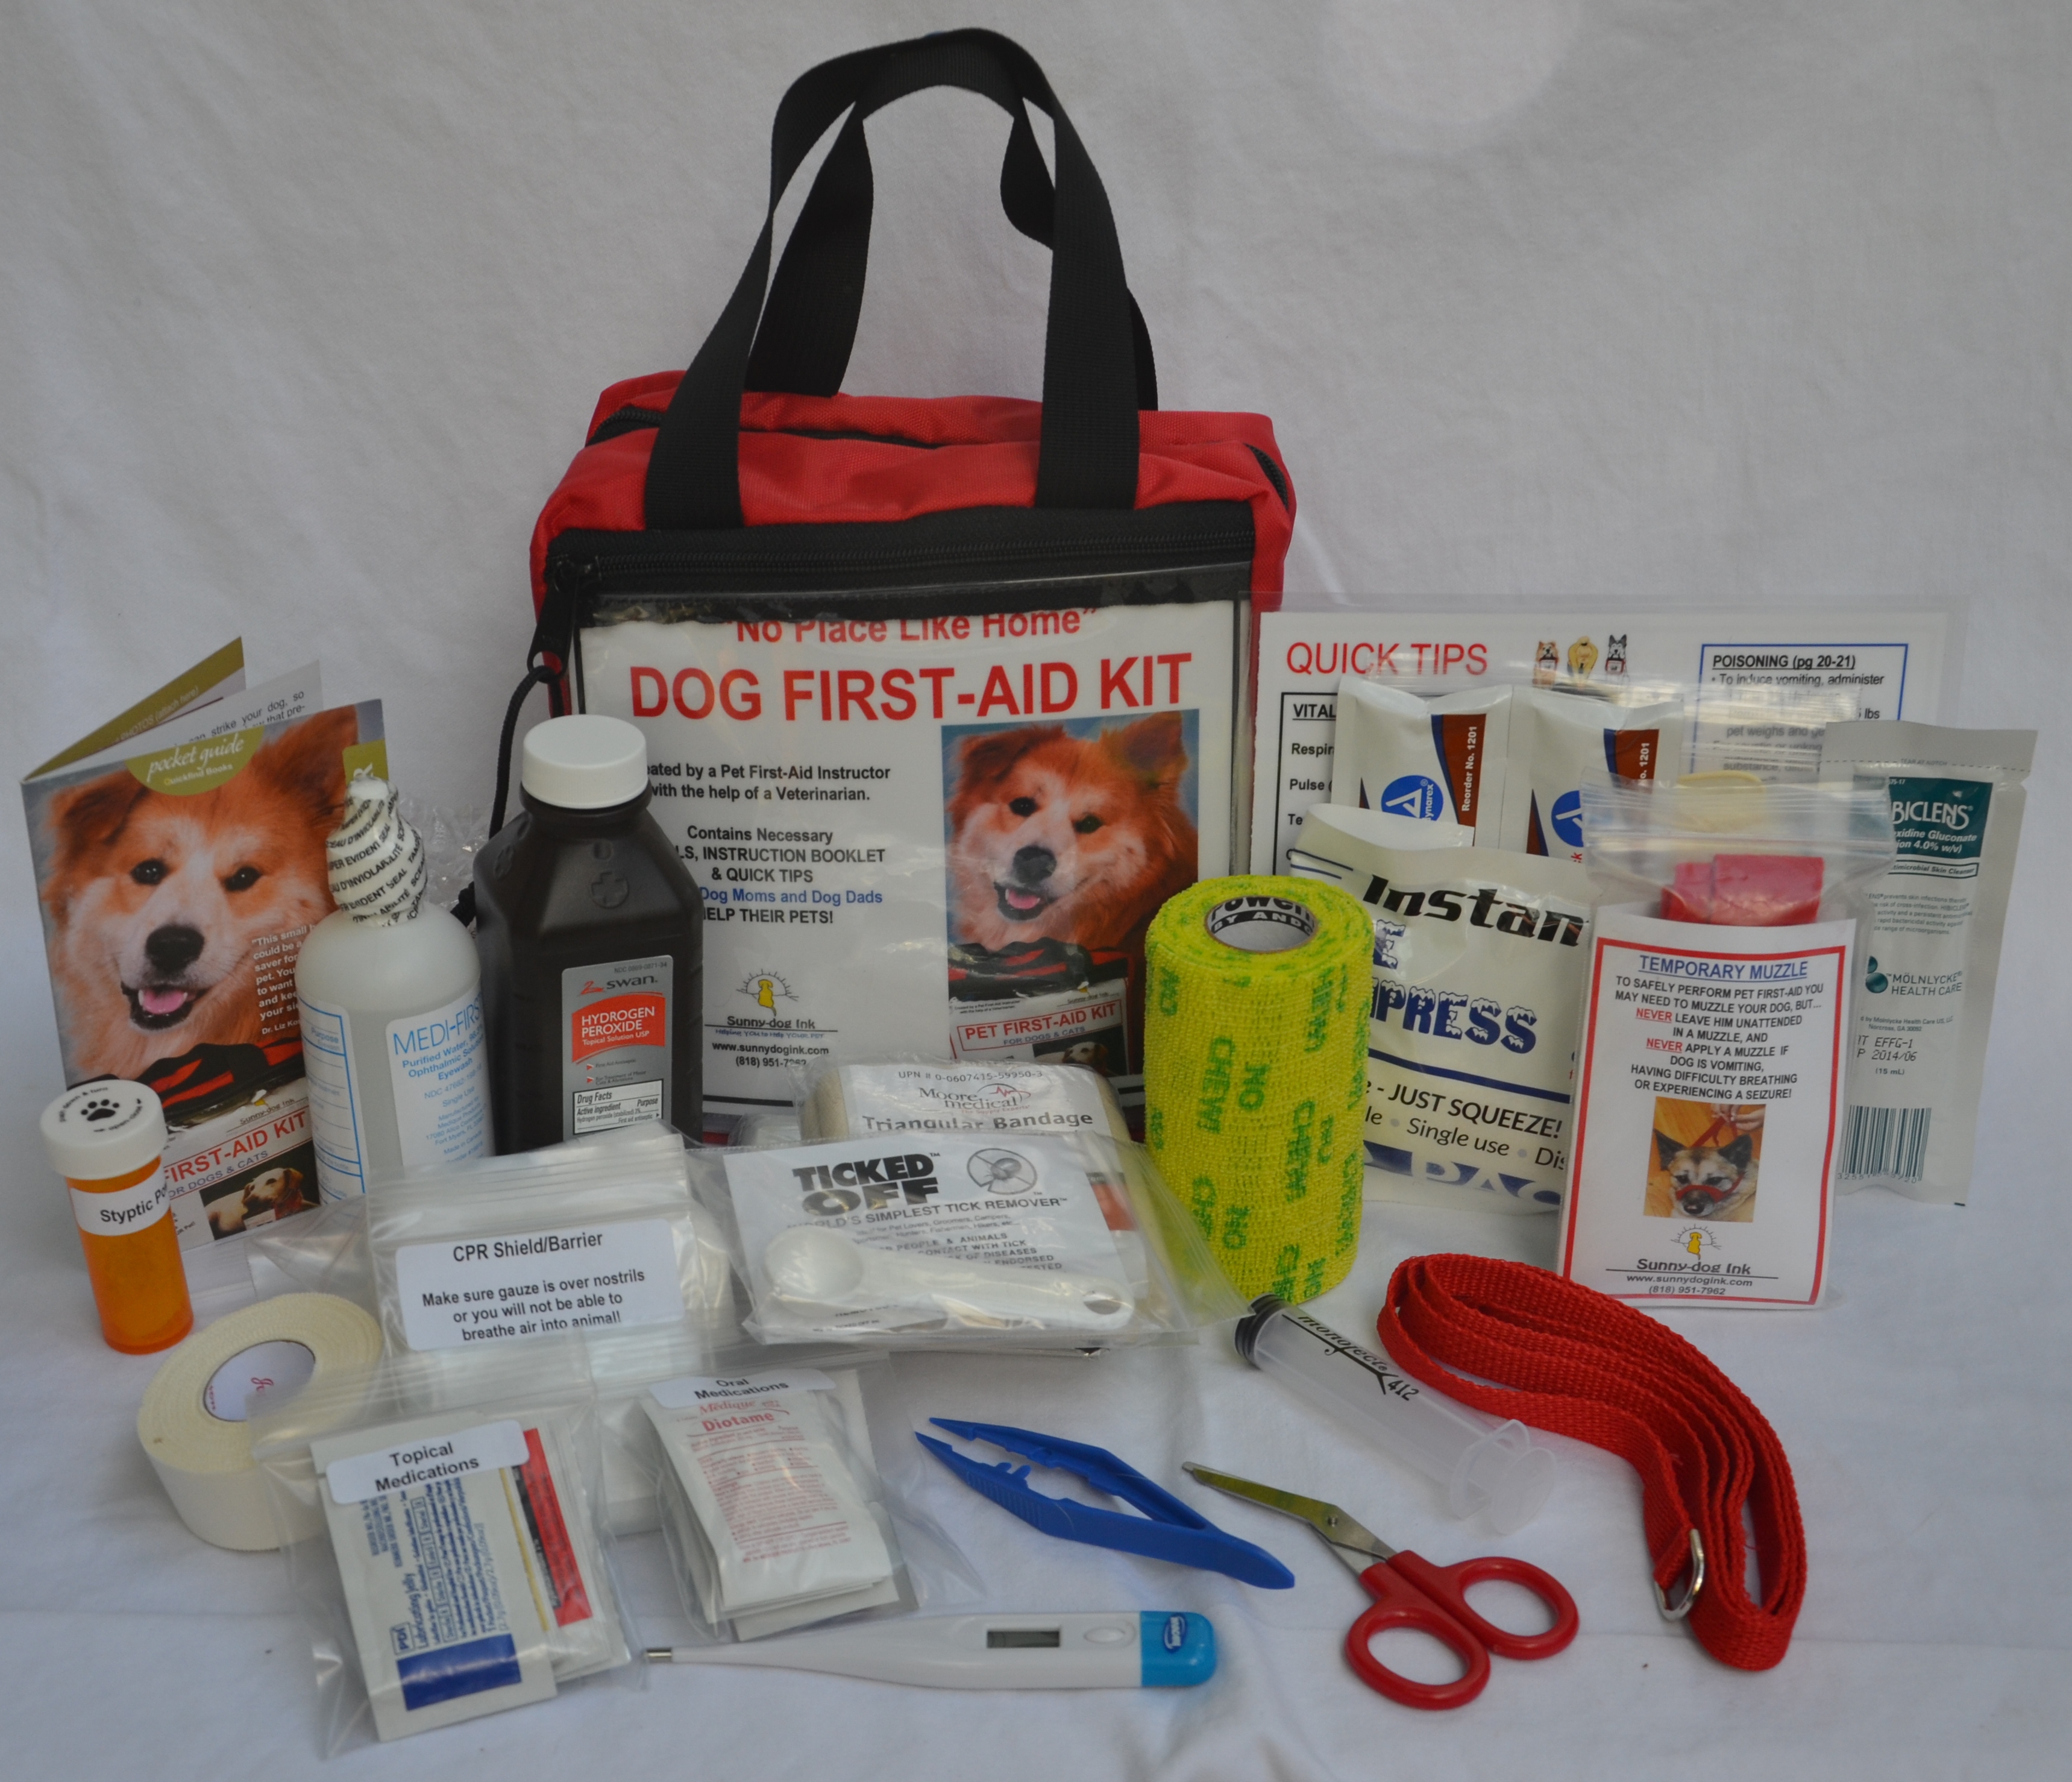 Don't forget to have a first-aid kit handy! Image source: sunnydogink.com